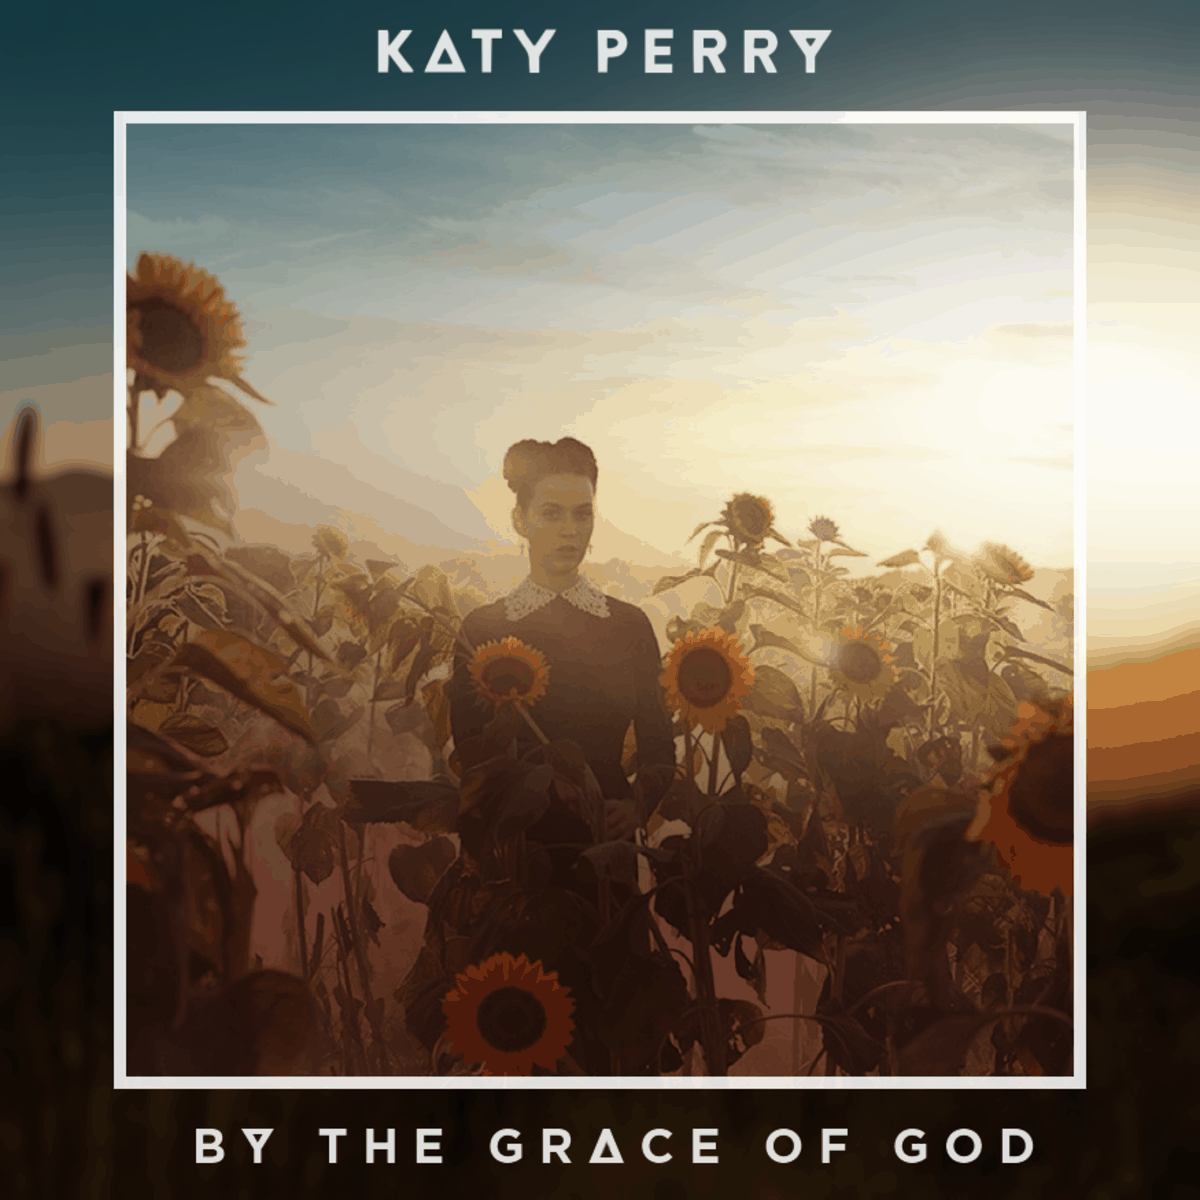 Katy-Perry-By-the-Grace-of-God-made-by-vinny-2015